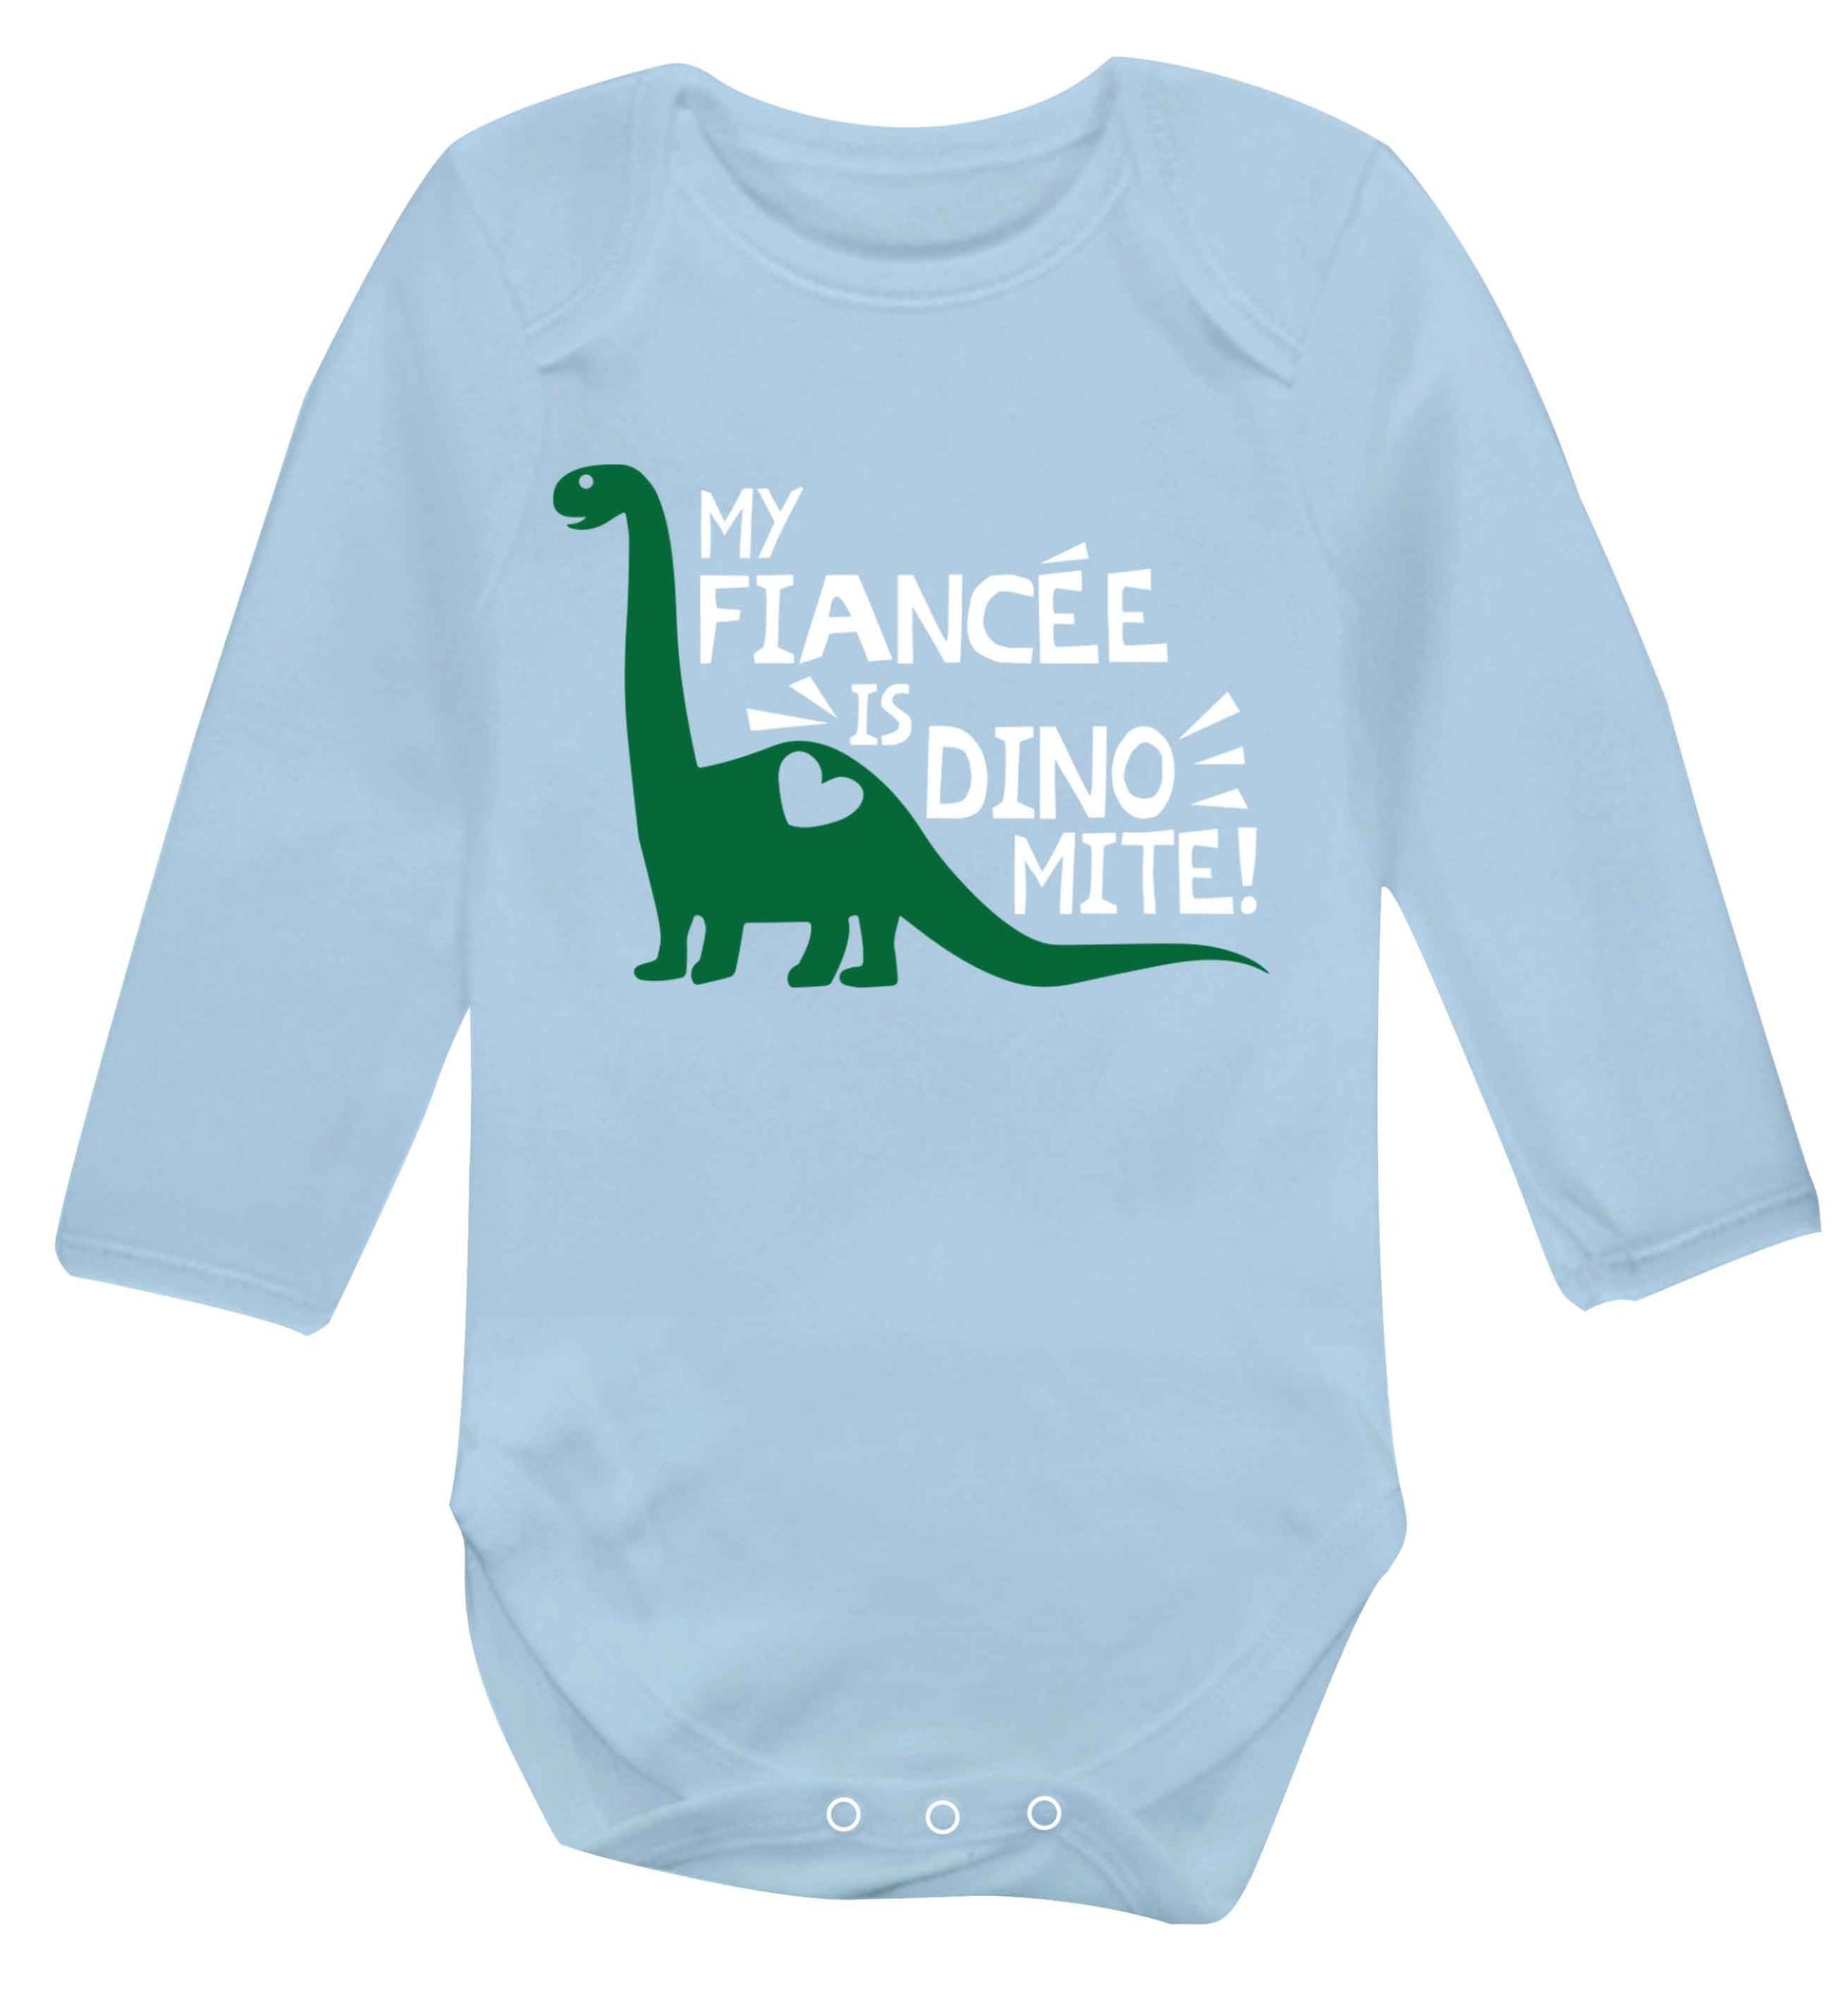 My fiancee is dinomite! Baby Vest long sleeved pale blue 6-12 months